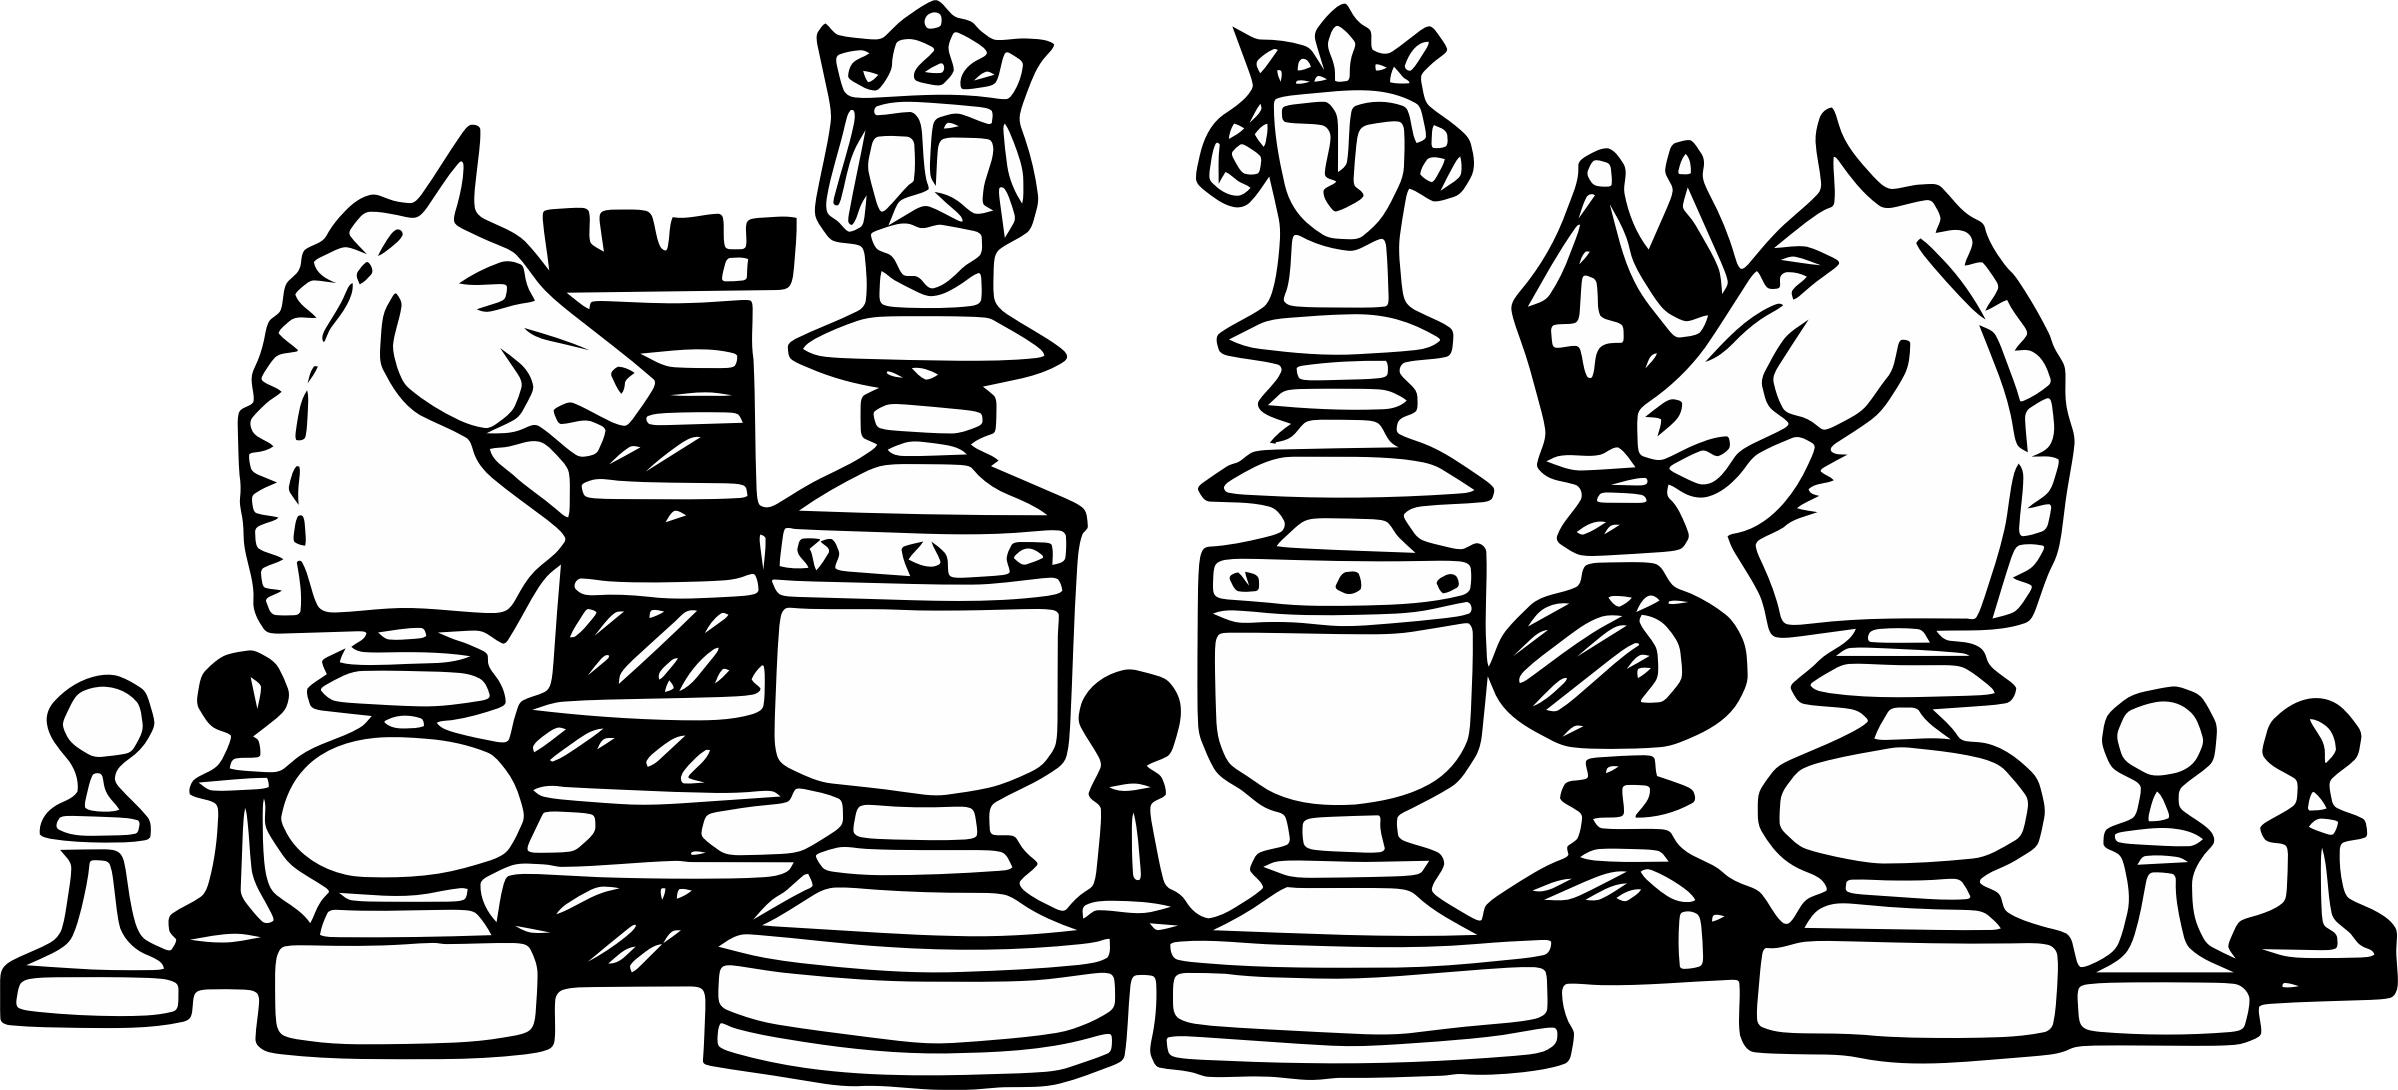 Chess Pieces Illustration png